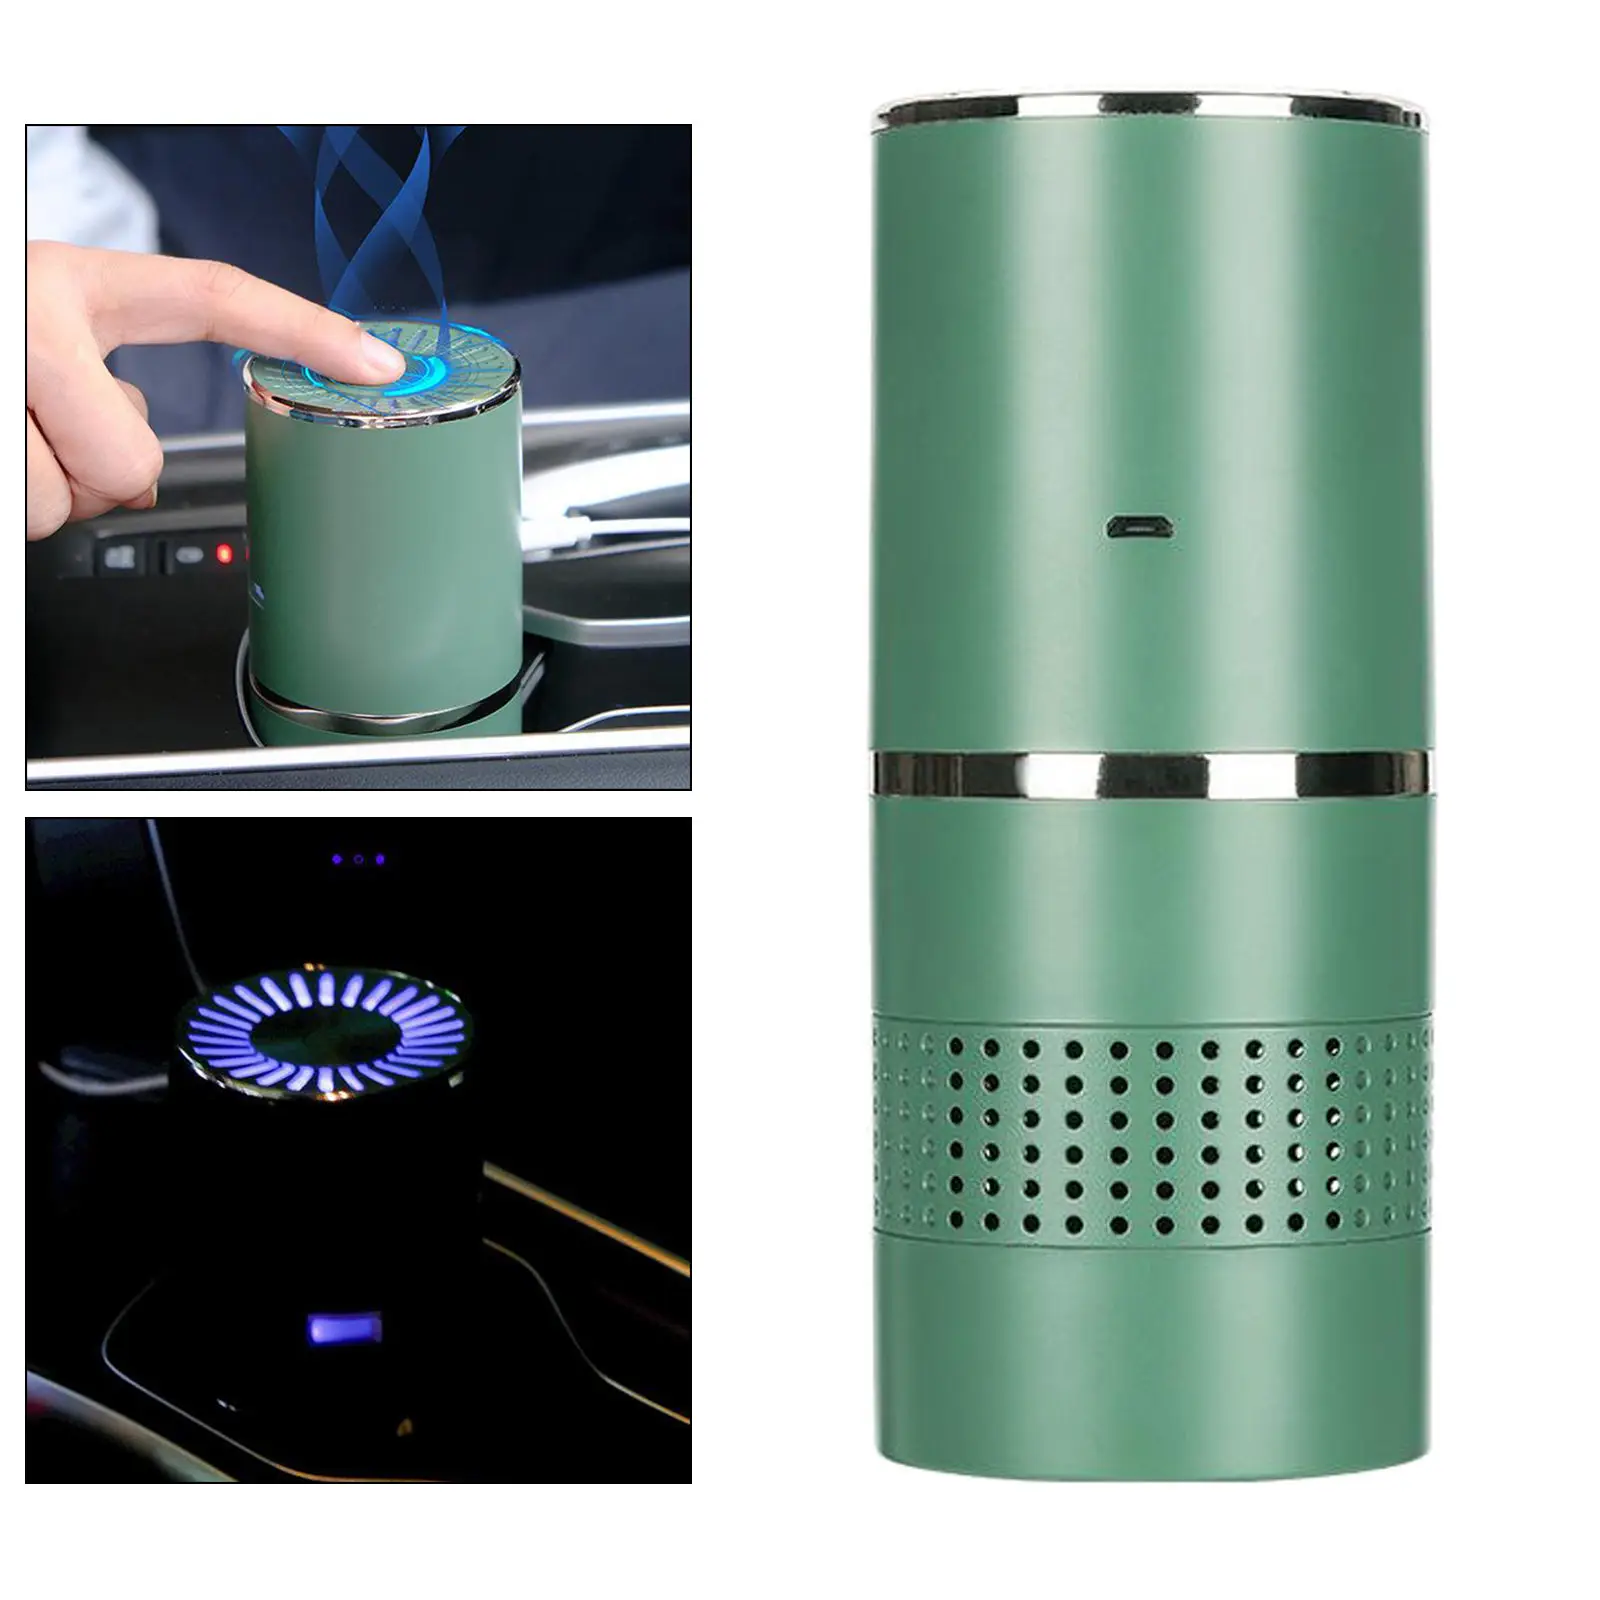 Mini Air Purifier USB Plug in Portable Desktop Air Cleaner with Night Light Low Noise Small Air Purifier